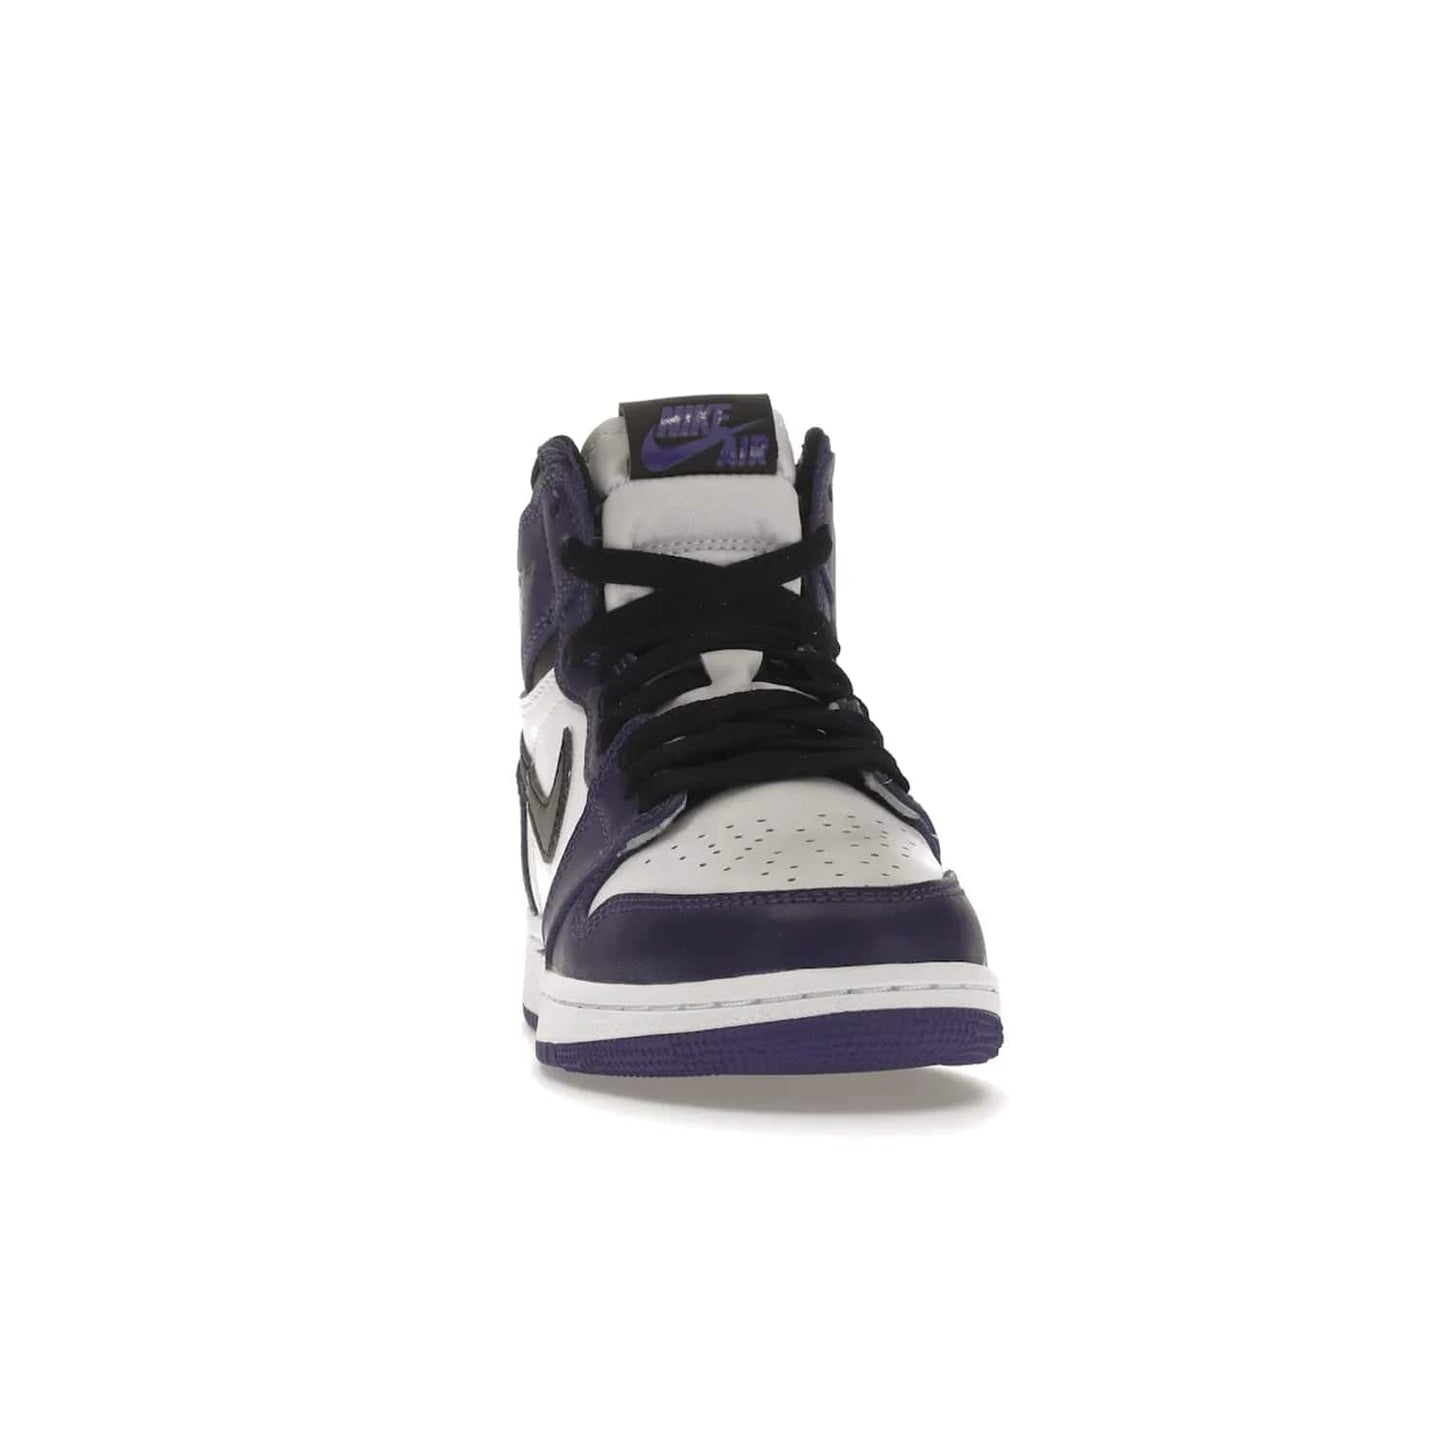 Jordan 1 Retro High Court Purple White (GS) - Image 9 - Only at www.BallersClubKickz.com - The Air Jordan 1 Retro High Court Purple is here and young sneaker heads can show off classic style. Features a white tumbled leather upper, black swoosh, purple overlays, black collar with purple overlay, white tongue, black patch with purple Nike Air logo and swoosh, white midsole, and purple rubber outsole with circular pattern.